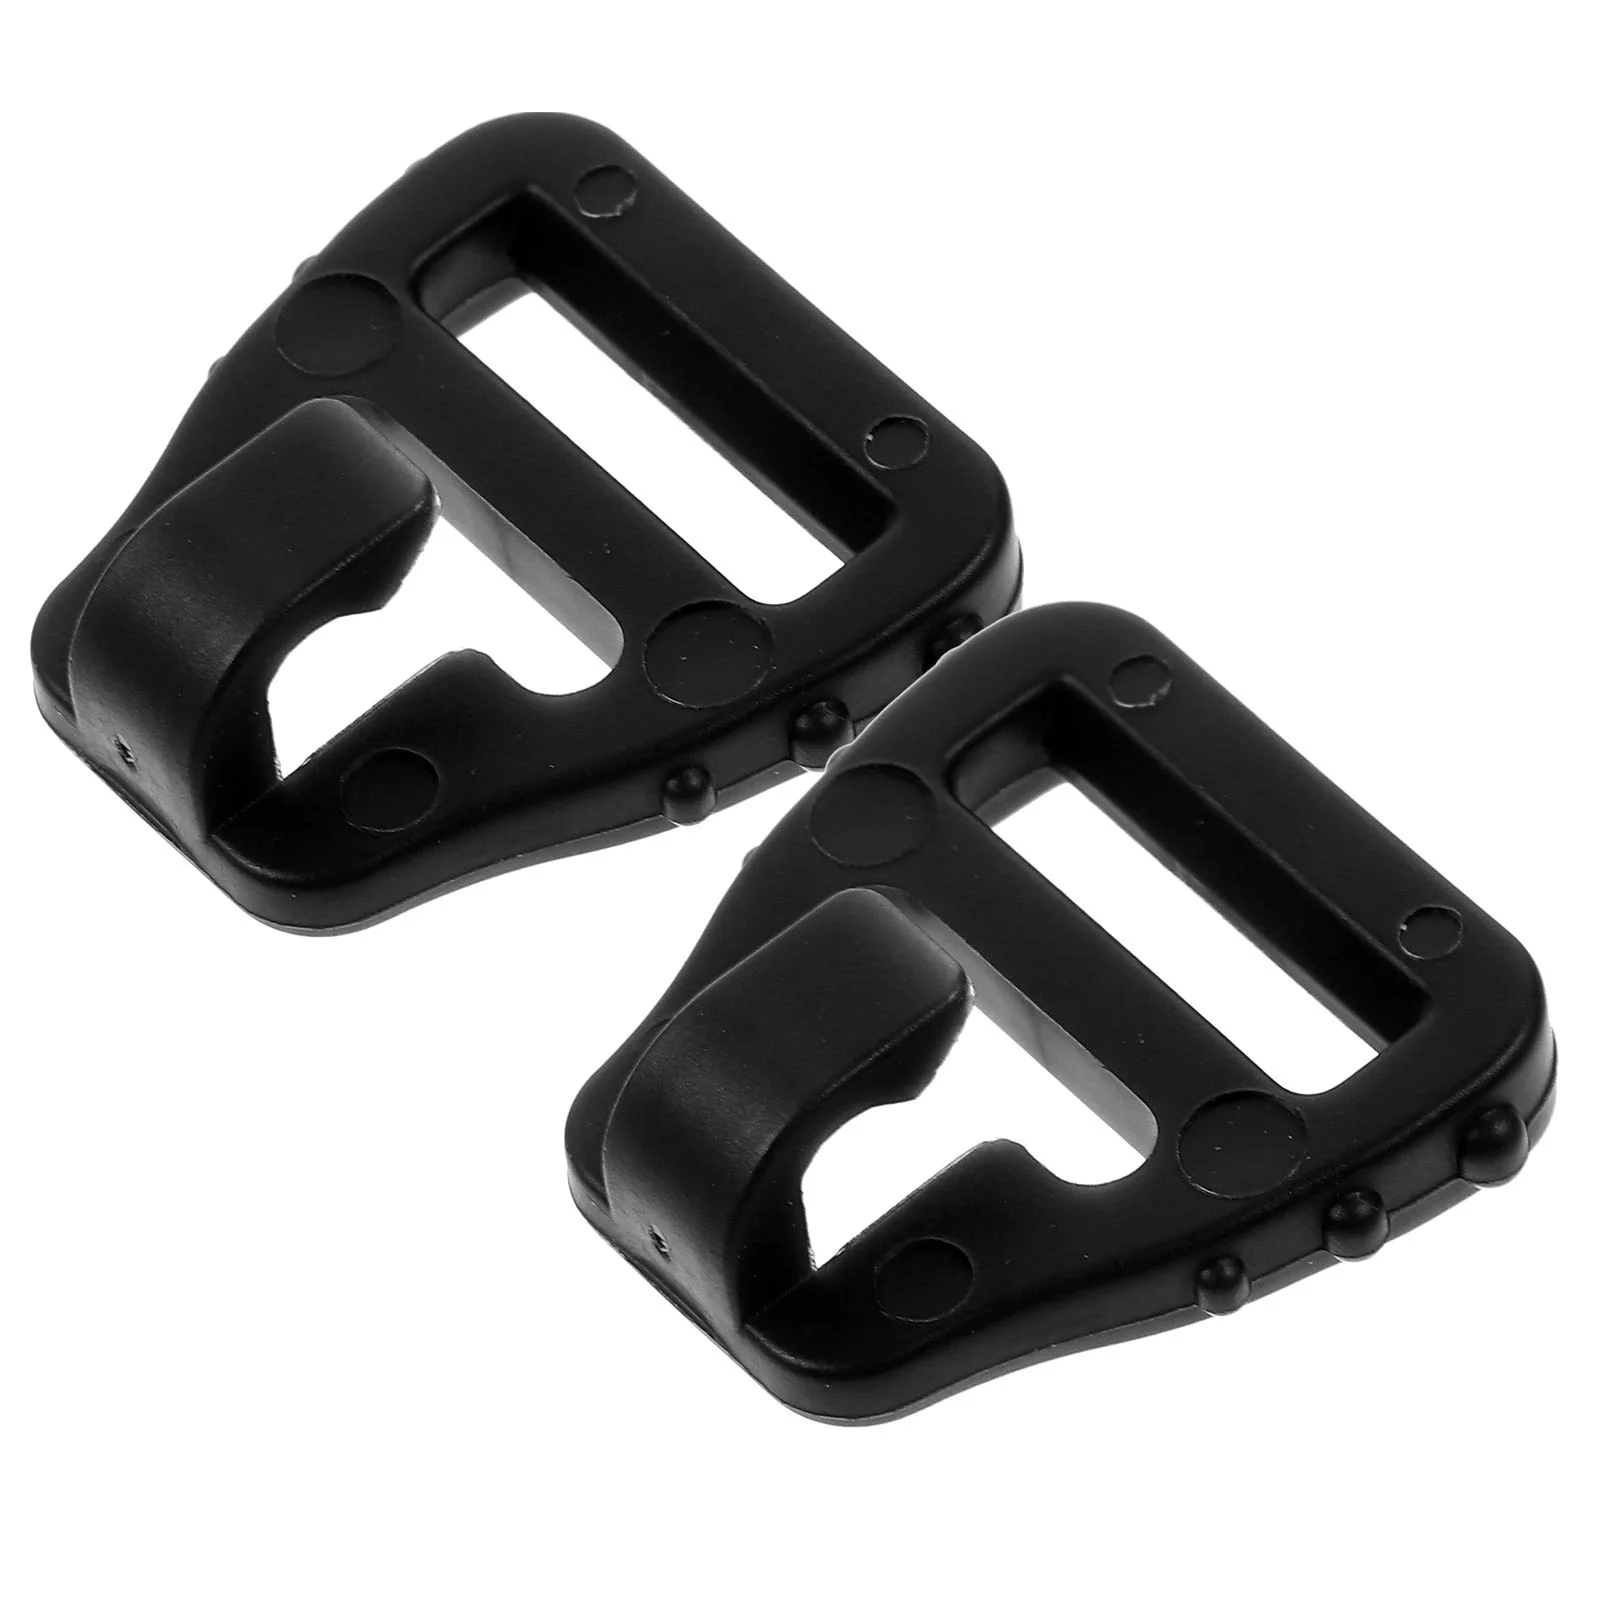 

2 Pcs Ventilator Line Brush Cpap Strap Buckles Replacement Accessories Head Band Adjustable Mask Machine Supplies Abs Clips